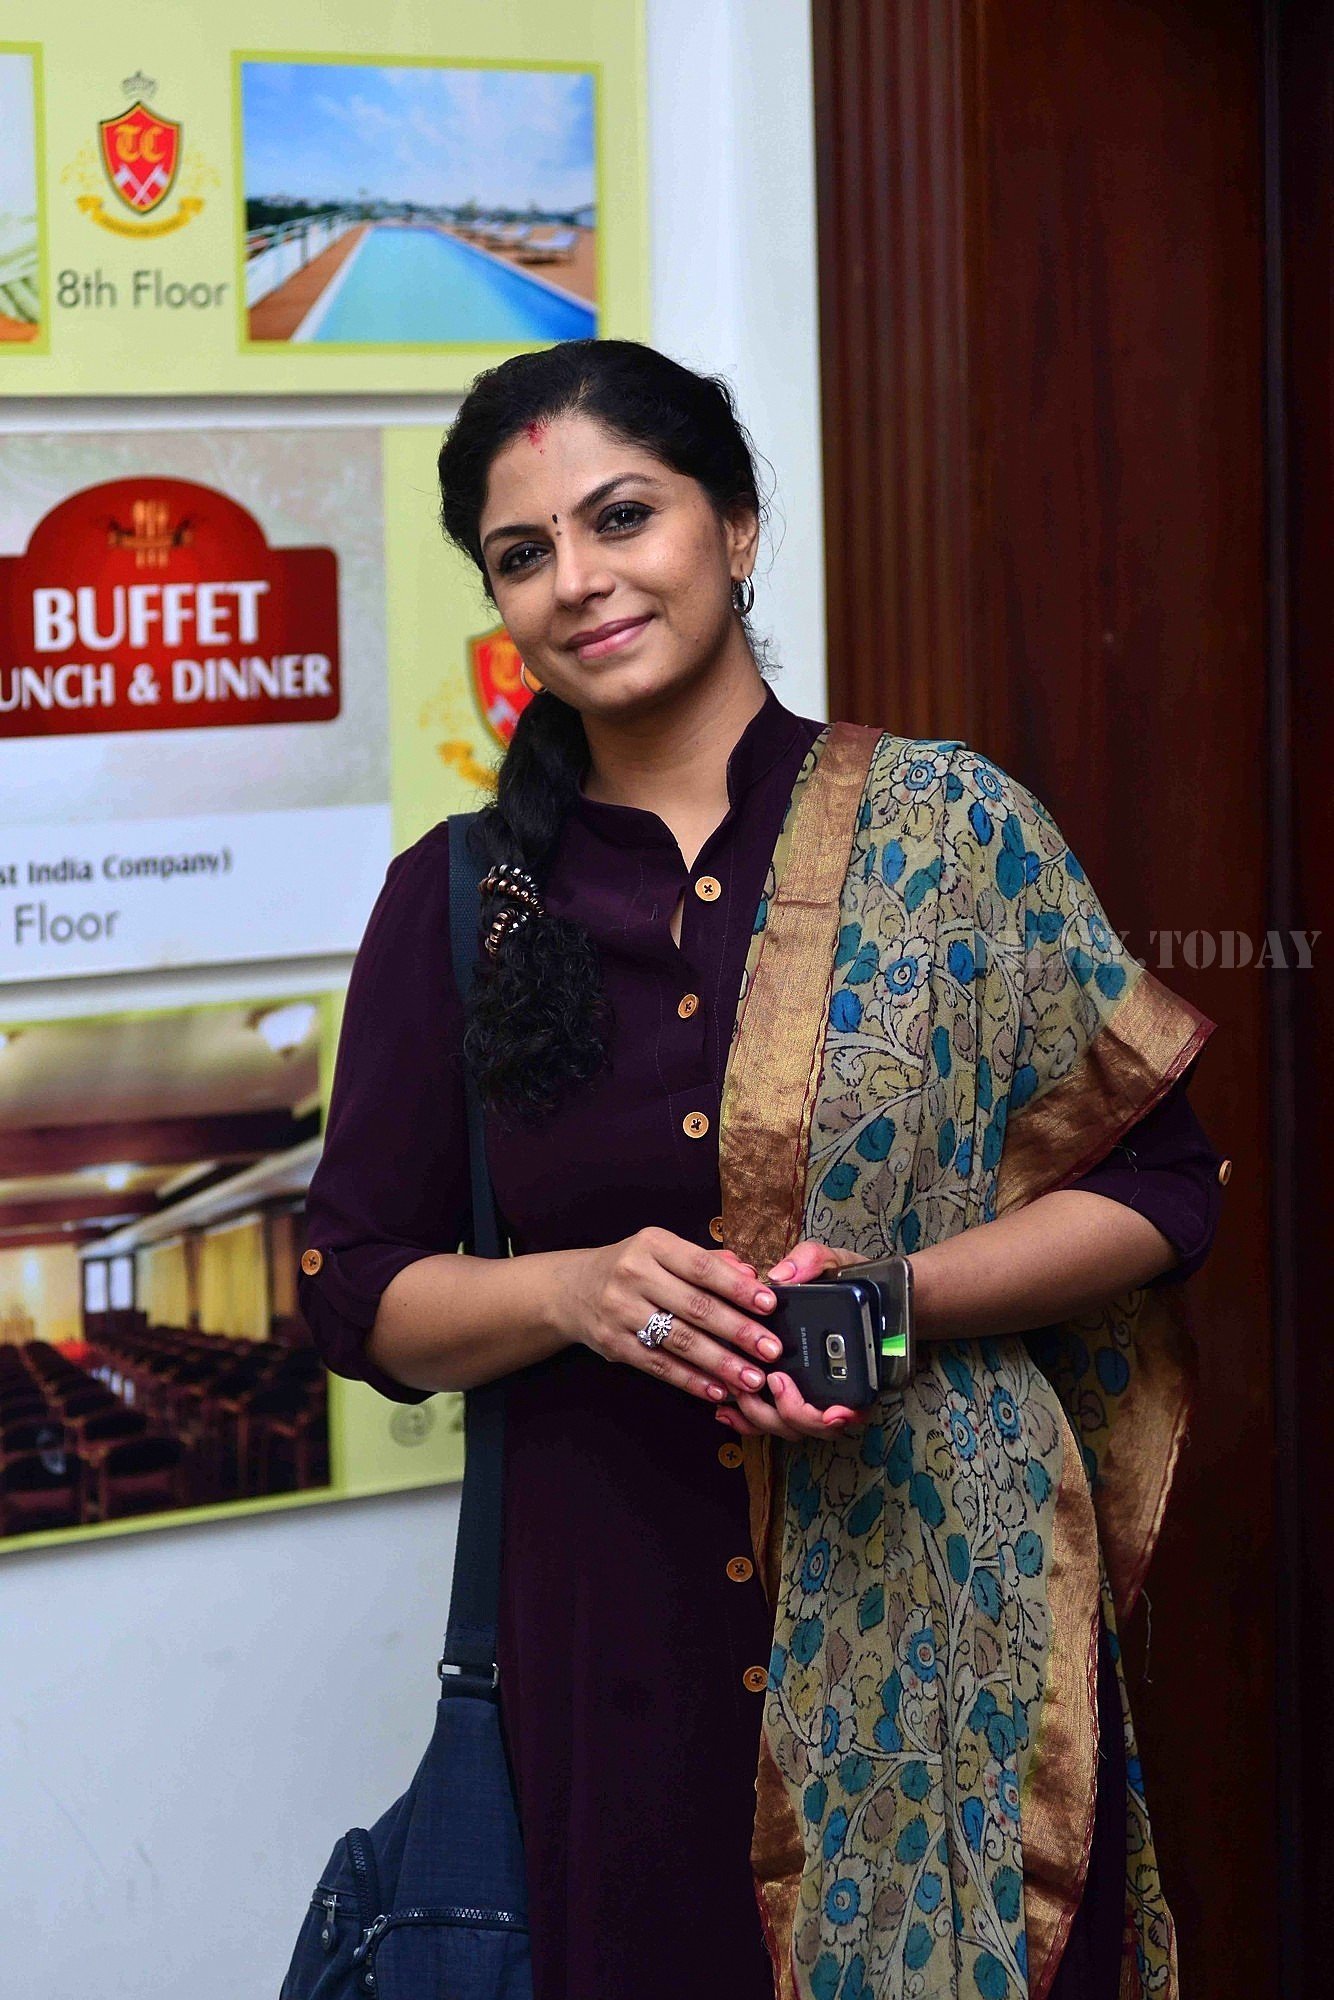 Actress Asha Sarath Untitled Event Photos Gallery | Picture 1525817